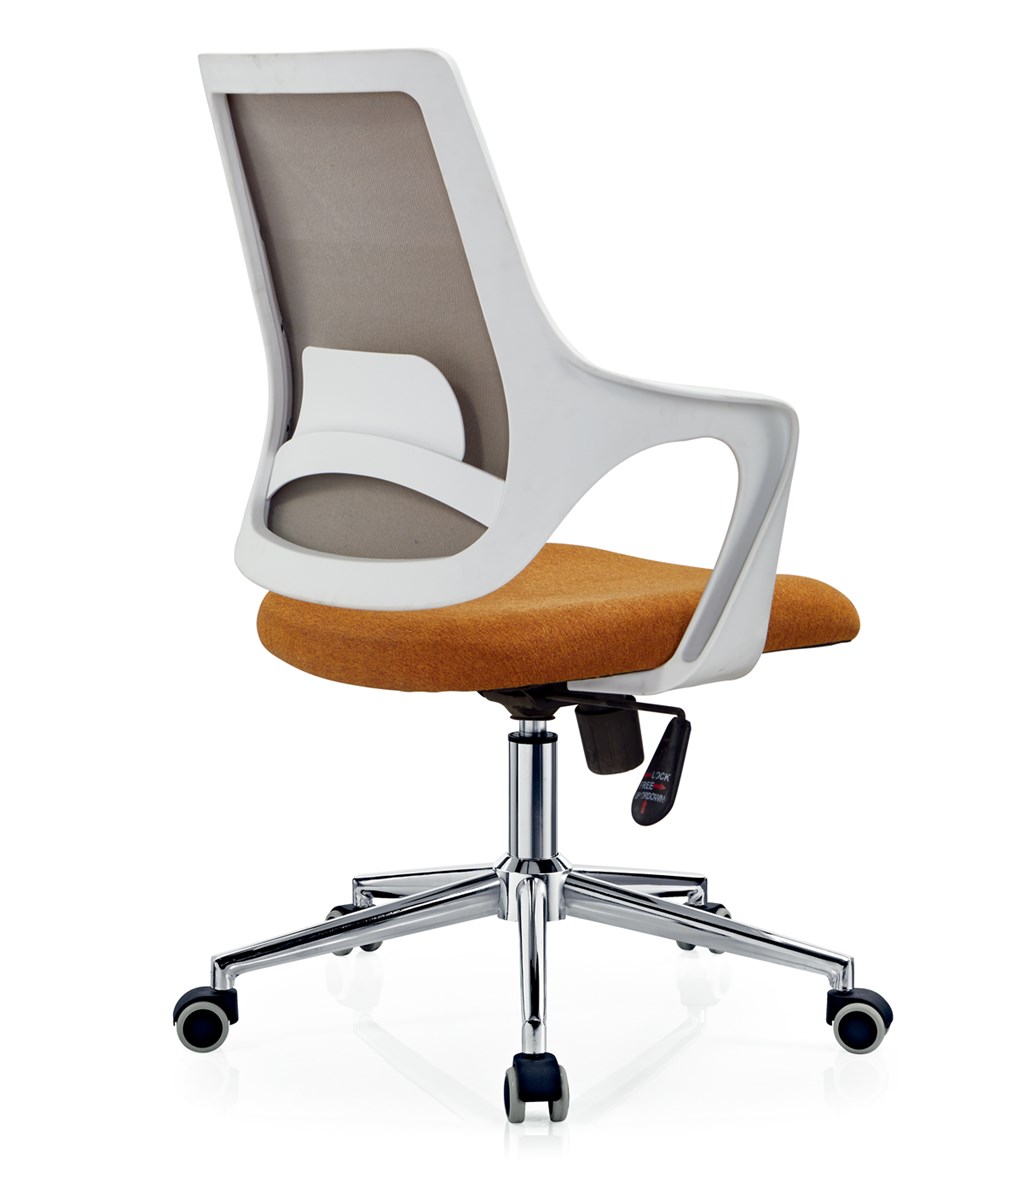 Professional manufacturer office orange boss computer single chair with wheel